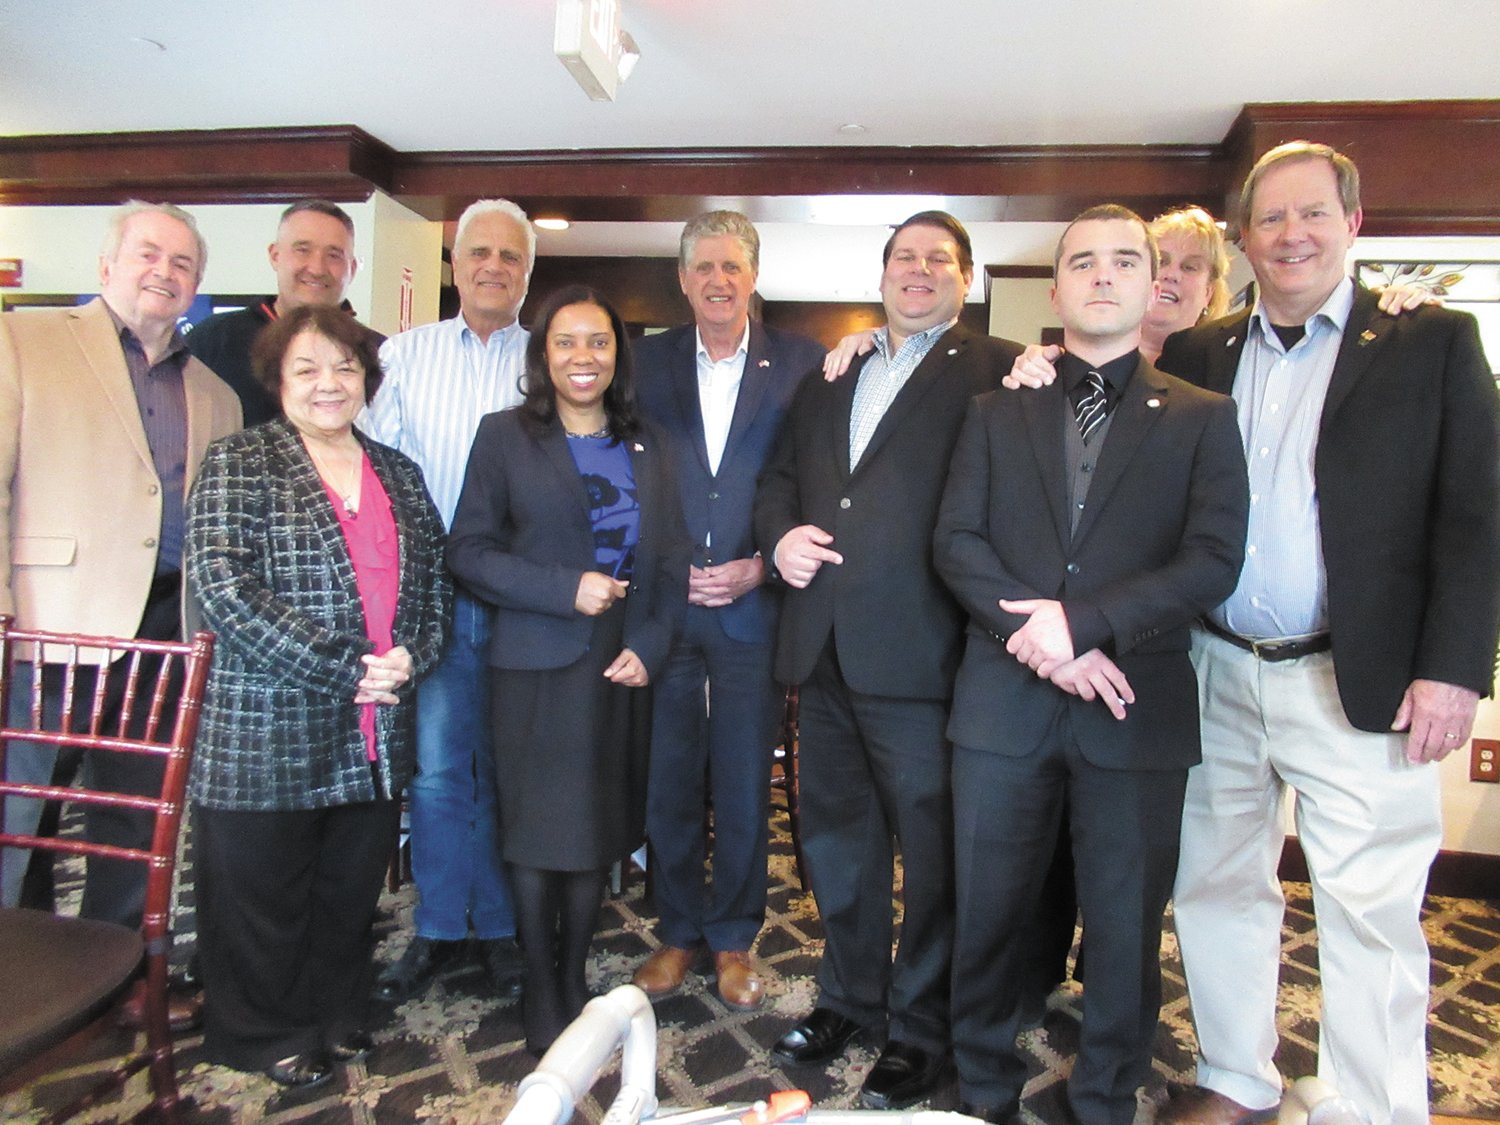 LINKED LEADERS: Gov. Dan McKee and Lt. Gov. Sabina Matos are joined by Warwick City Council members James McElroy, Timothy Howe, Donna Travis, Steve McAllister, Anthony Sinapi, Democratic Party Chair Kim Wineman and William Foley during last week’s “Beer with the Governor” event at O’Rourke’s Bar & Grill in Pawtuxet Village. (Warwick Beacon photos by Pete Fontaine)